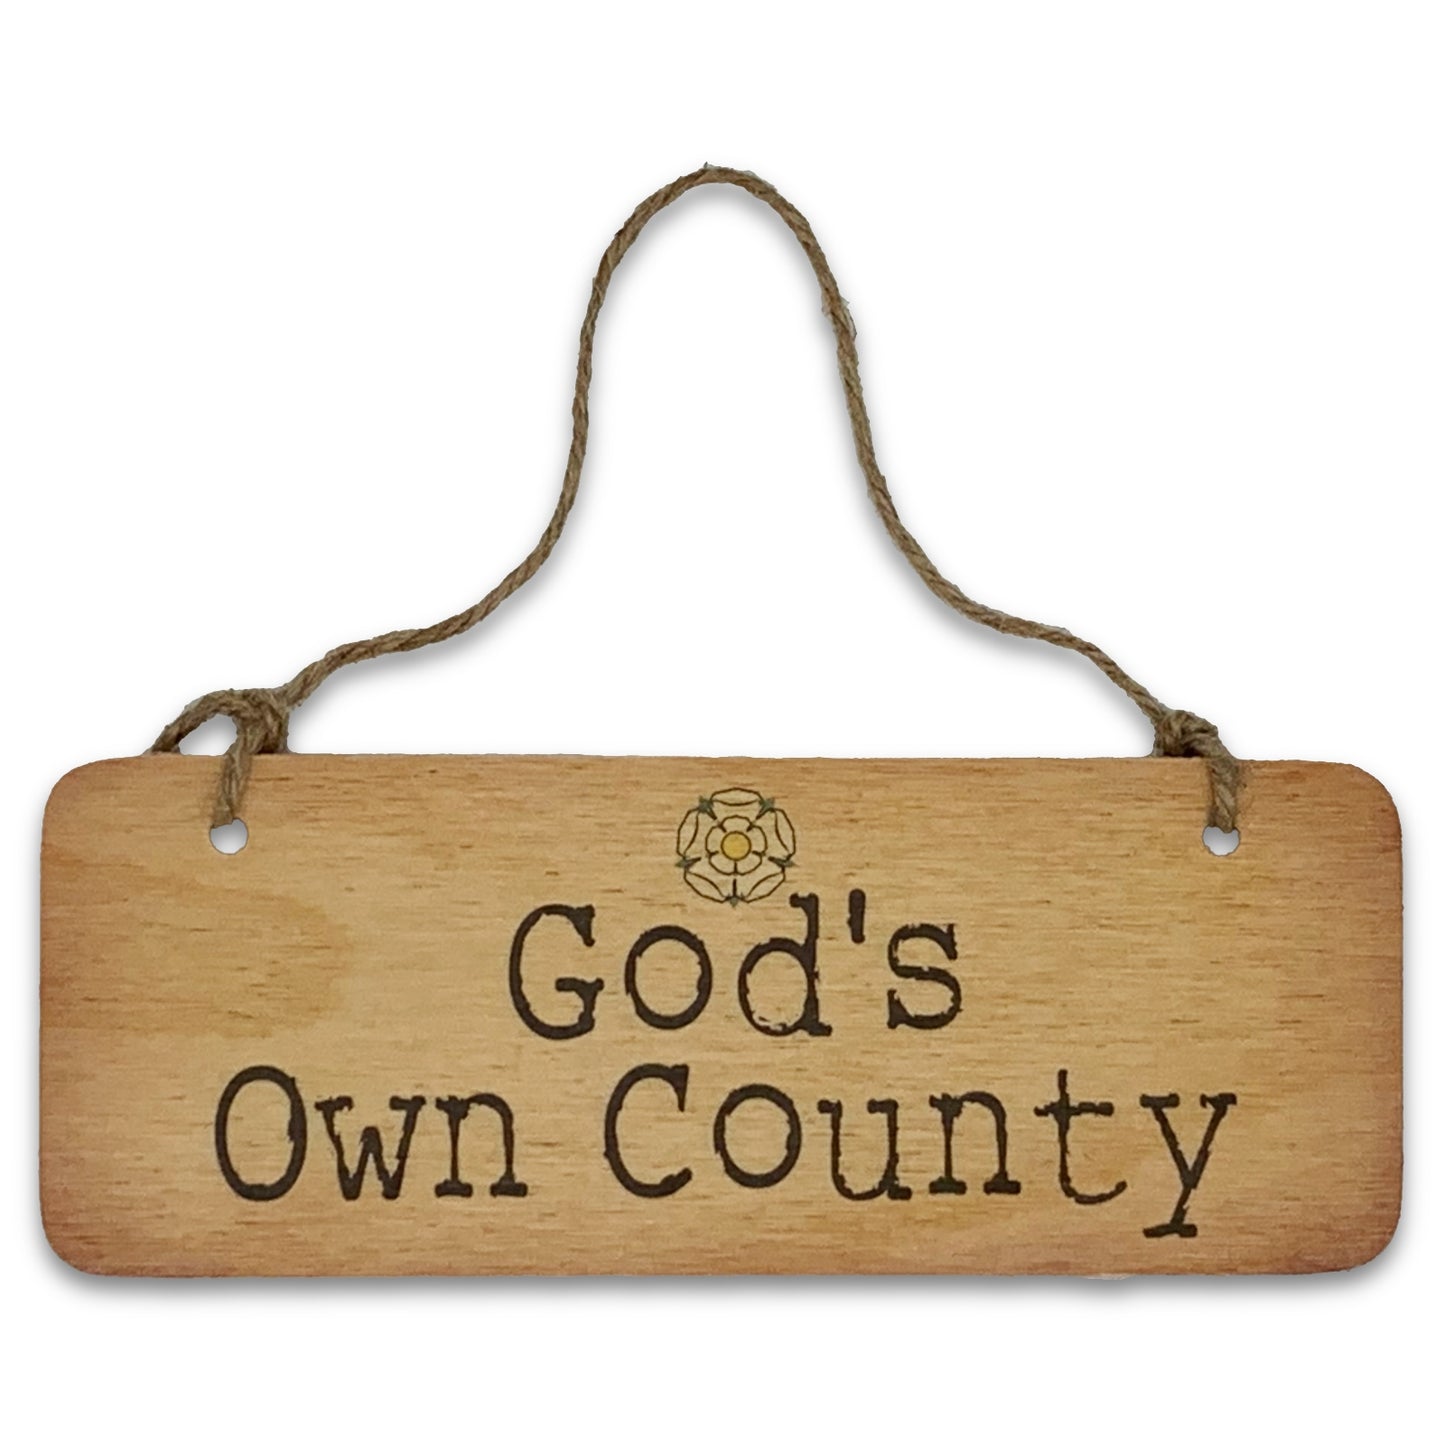 God's Own County Rustic Wooden Sign - The Great Yorkshire Shop